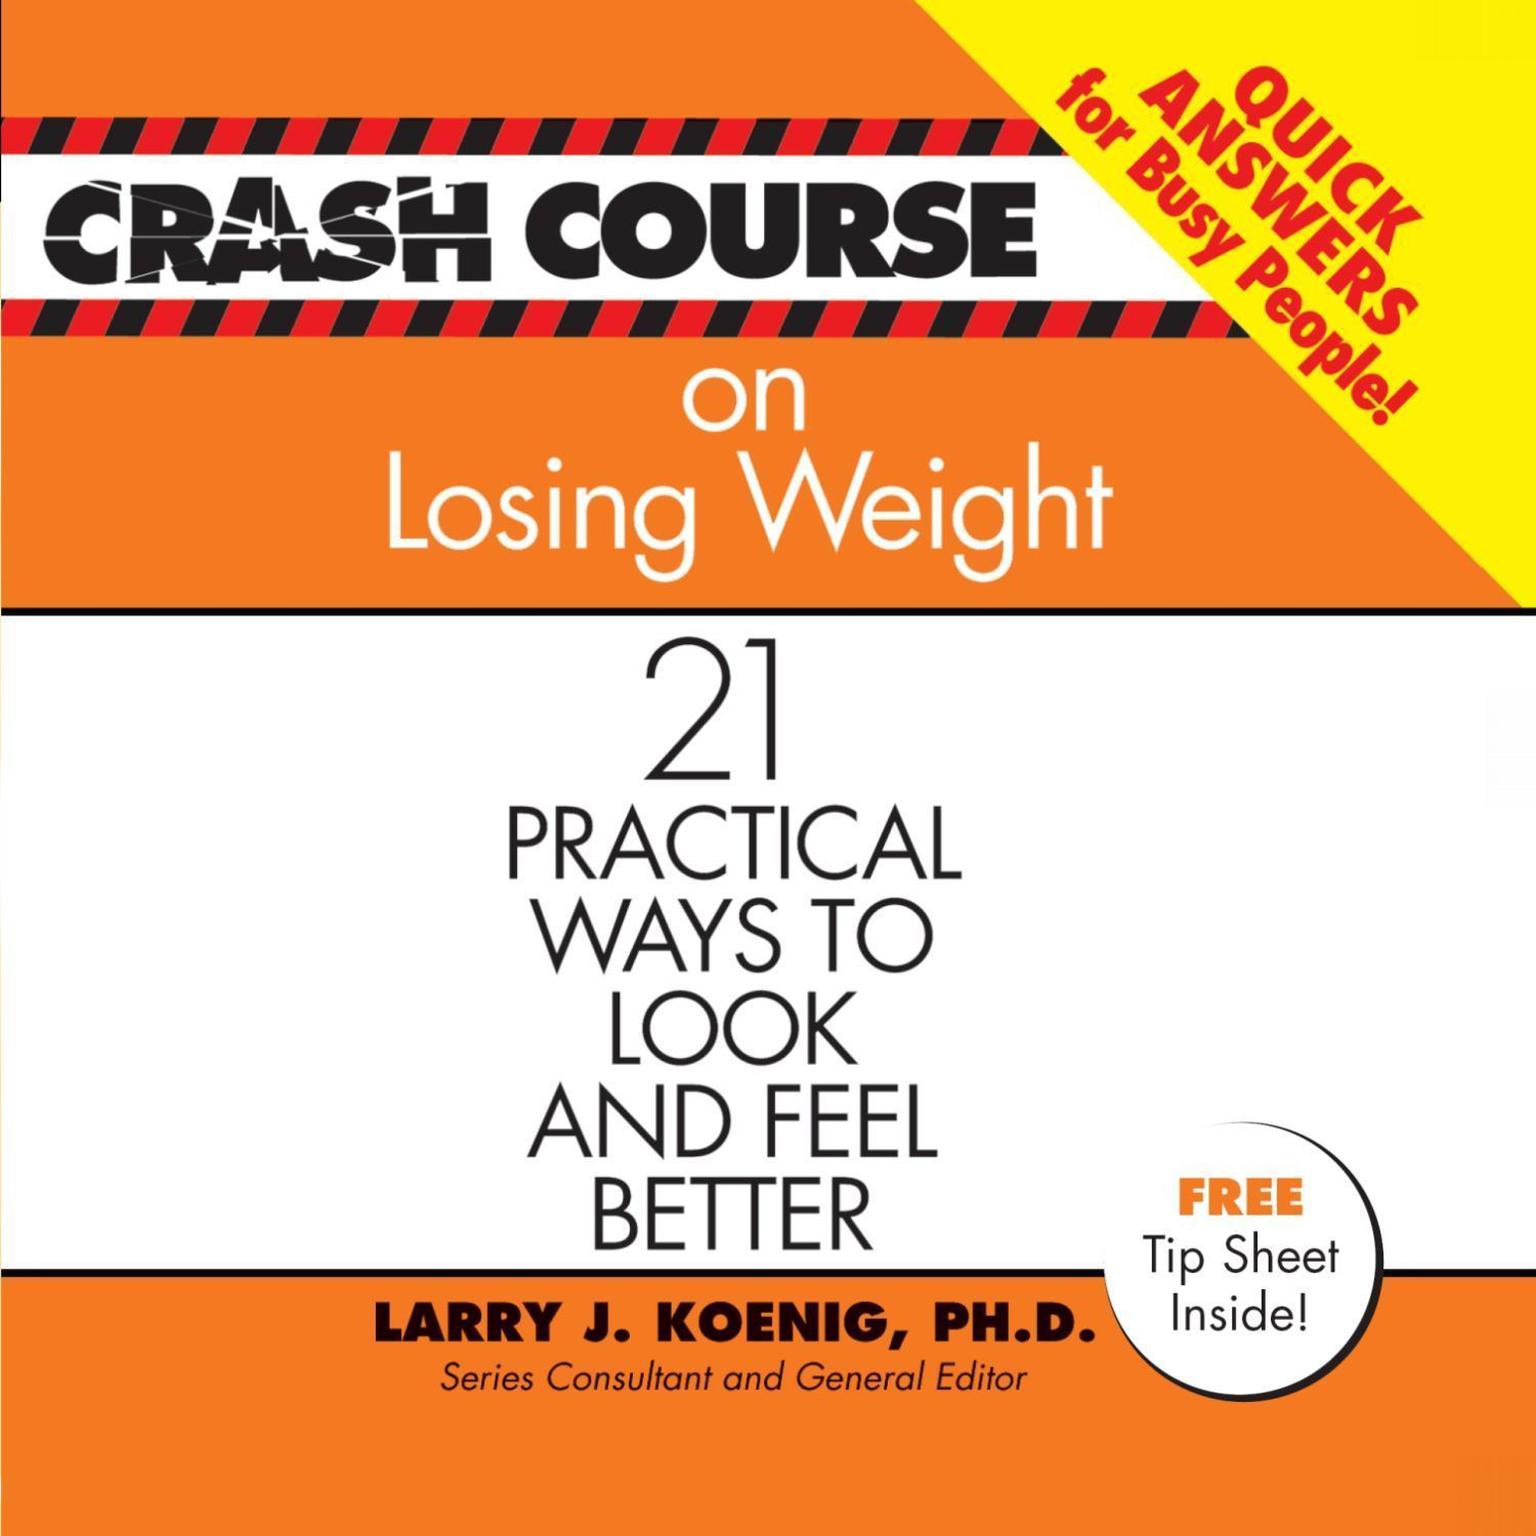 Crash Course on Losing Weight: 21 Practical Ways to Look and Feel Better Audiobook, by Larry J. Koenig